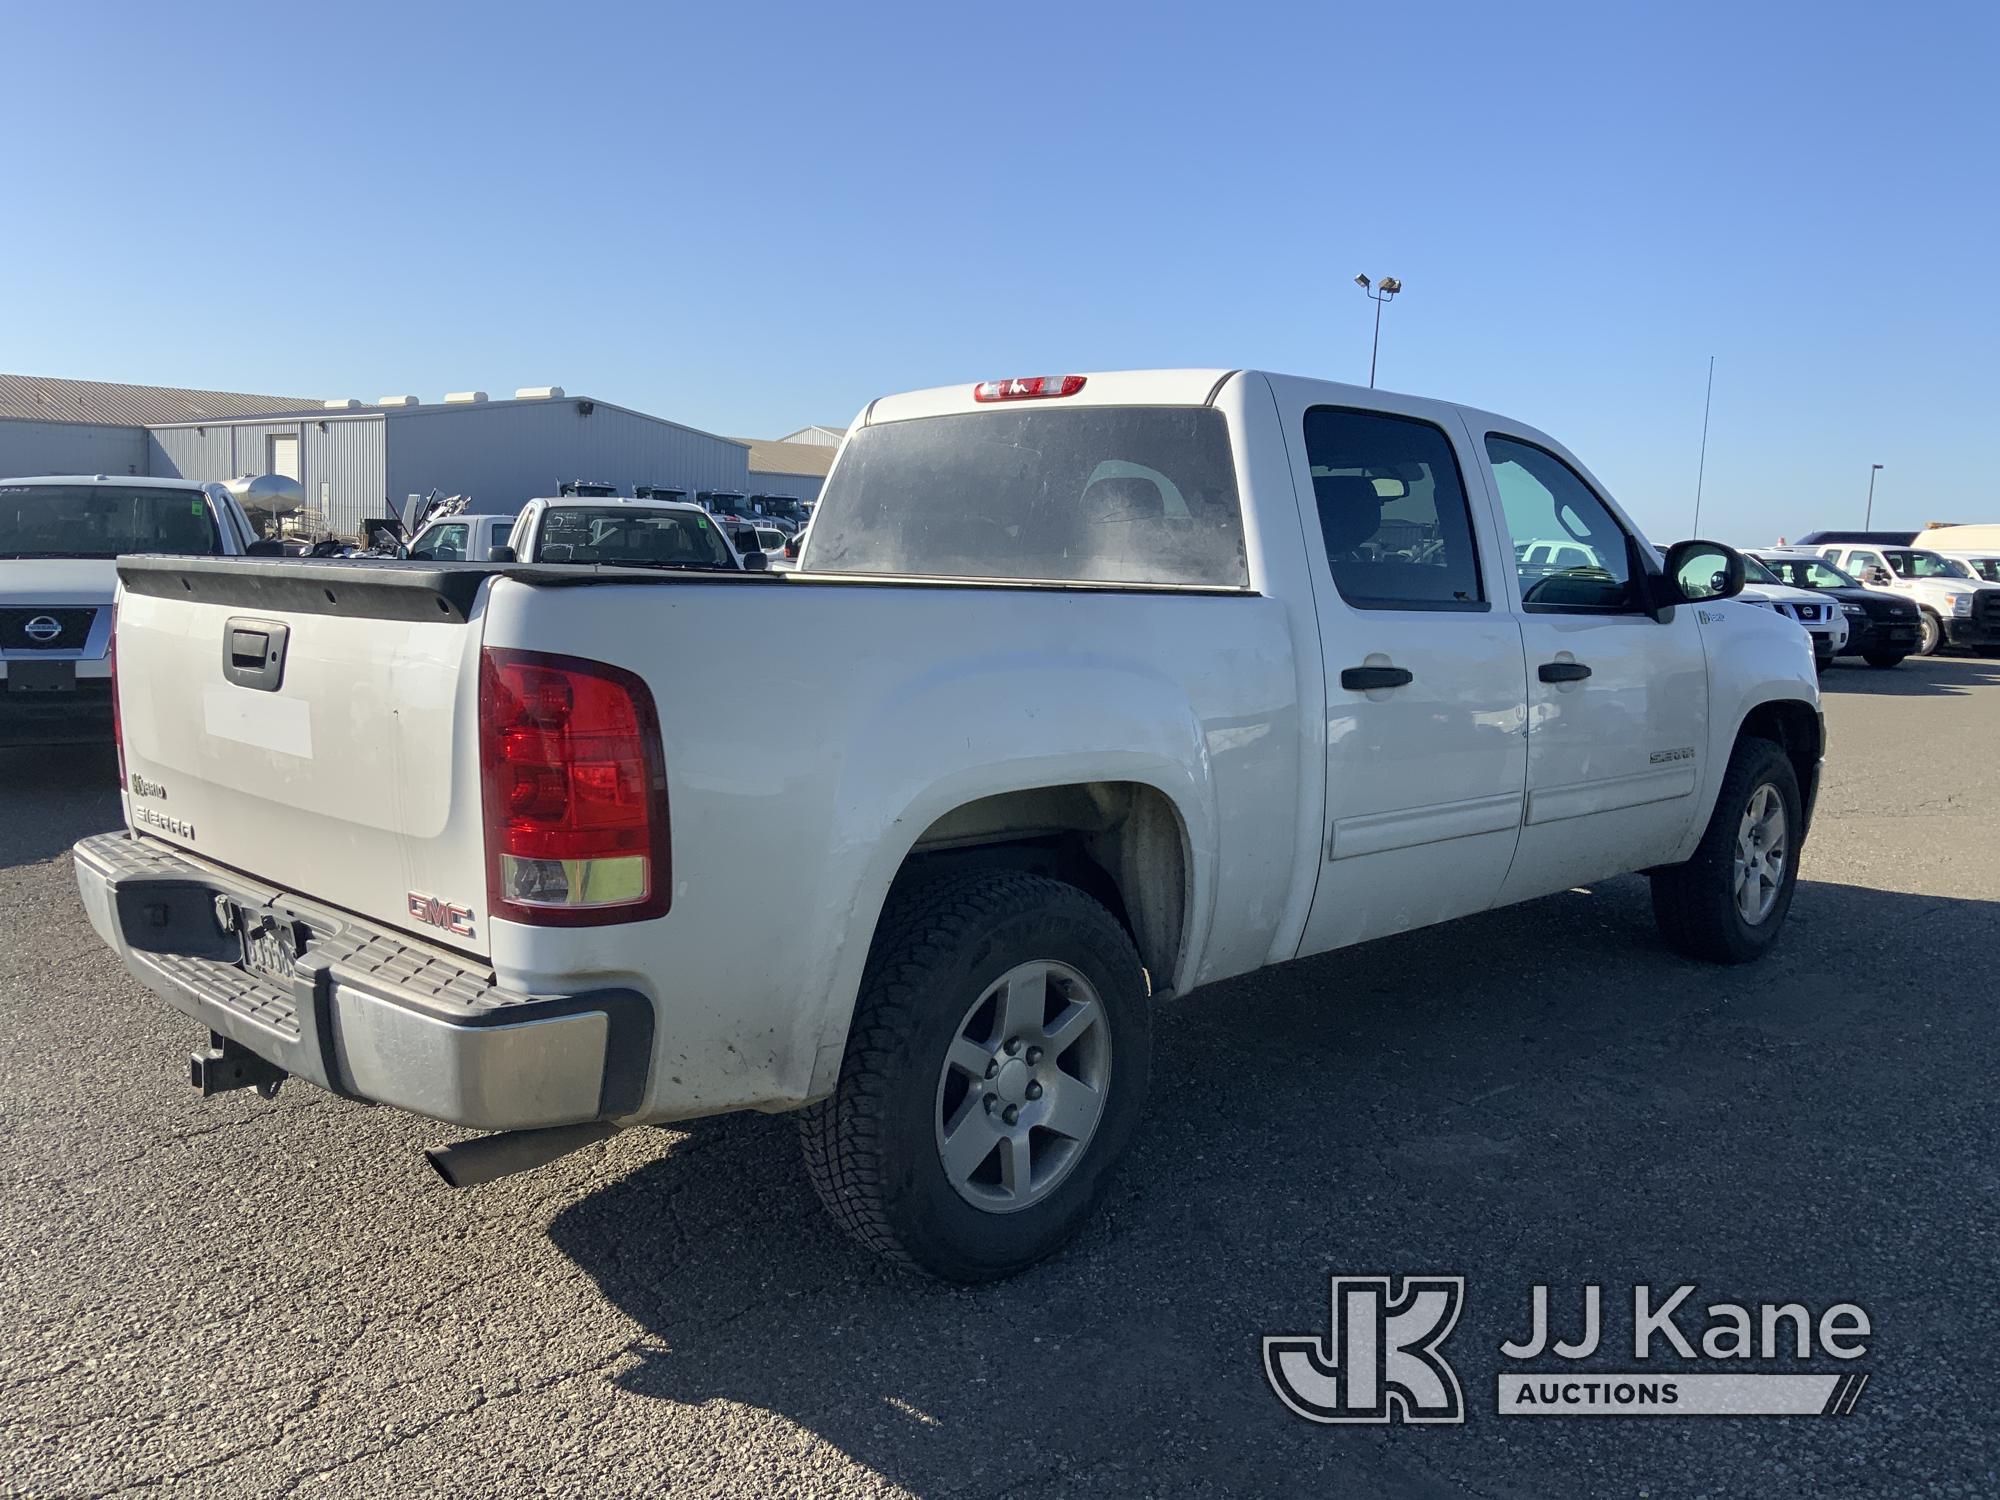 (Dixon, CA) 2013 GMC Sierra Hybrid 4x4 Crew-Cab Pickup Truck Runs & Moves, Drives Only In 4WD, Suspe